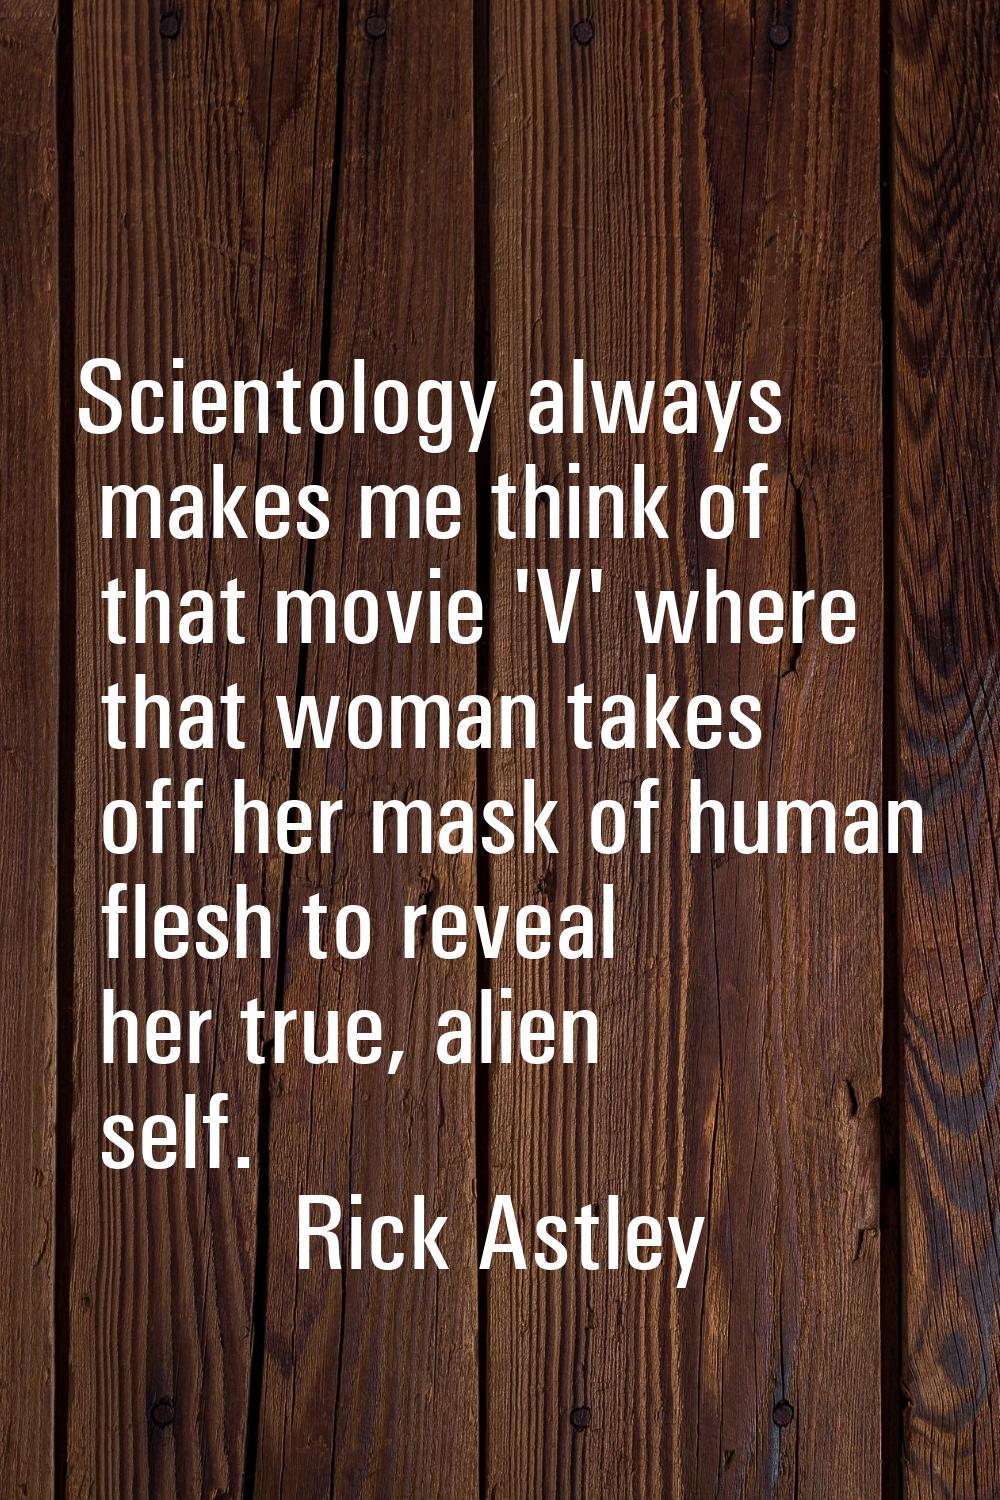 Scientology always makes me think of that movie 'V' where that woman takes off her mask of human fl